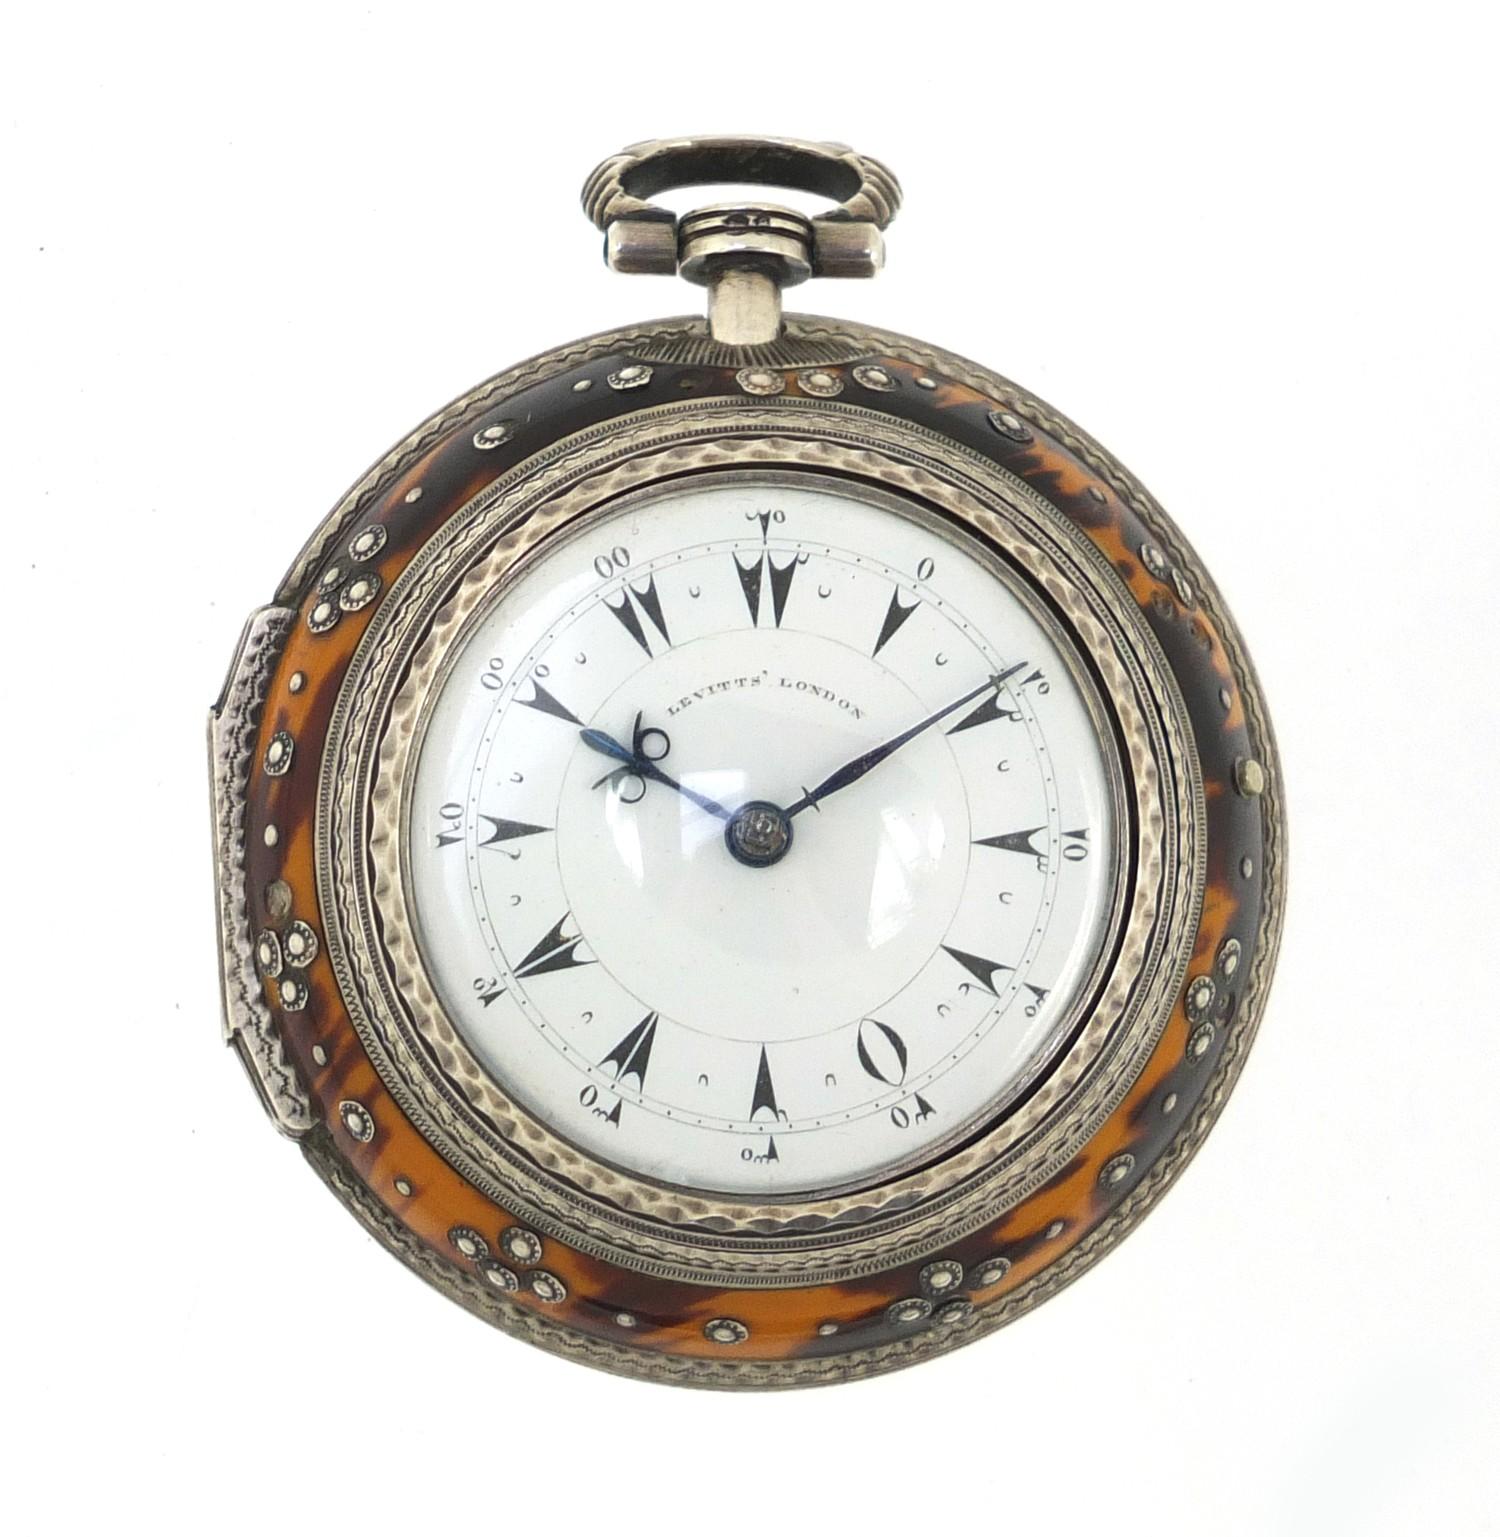 Gentlemen's silver and tortoiseshell double pair cased pocket watch with verge fusée movement, the - Image 2 of 19